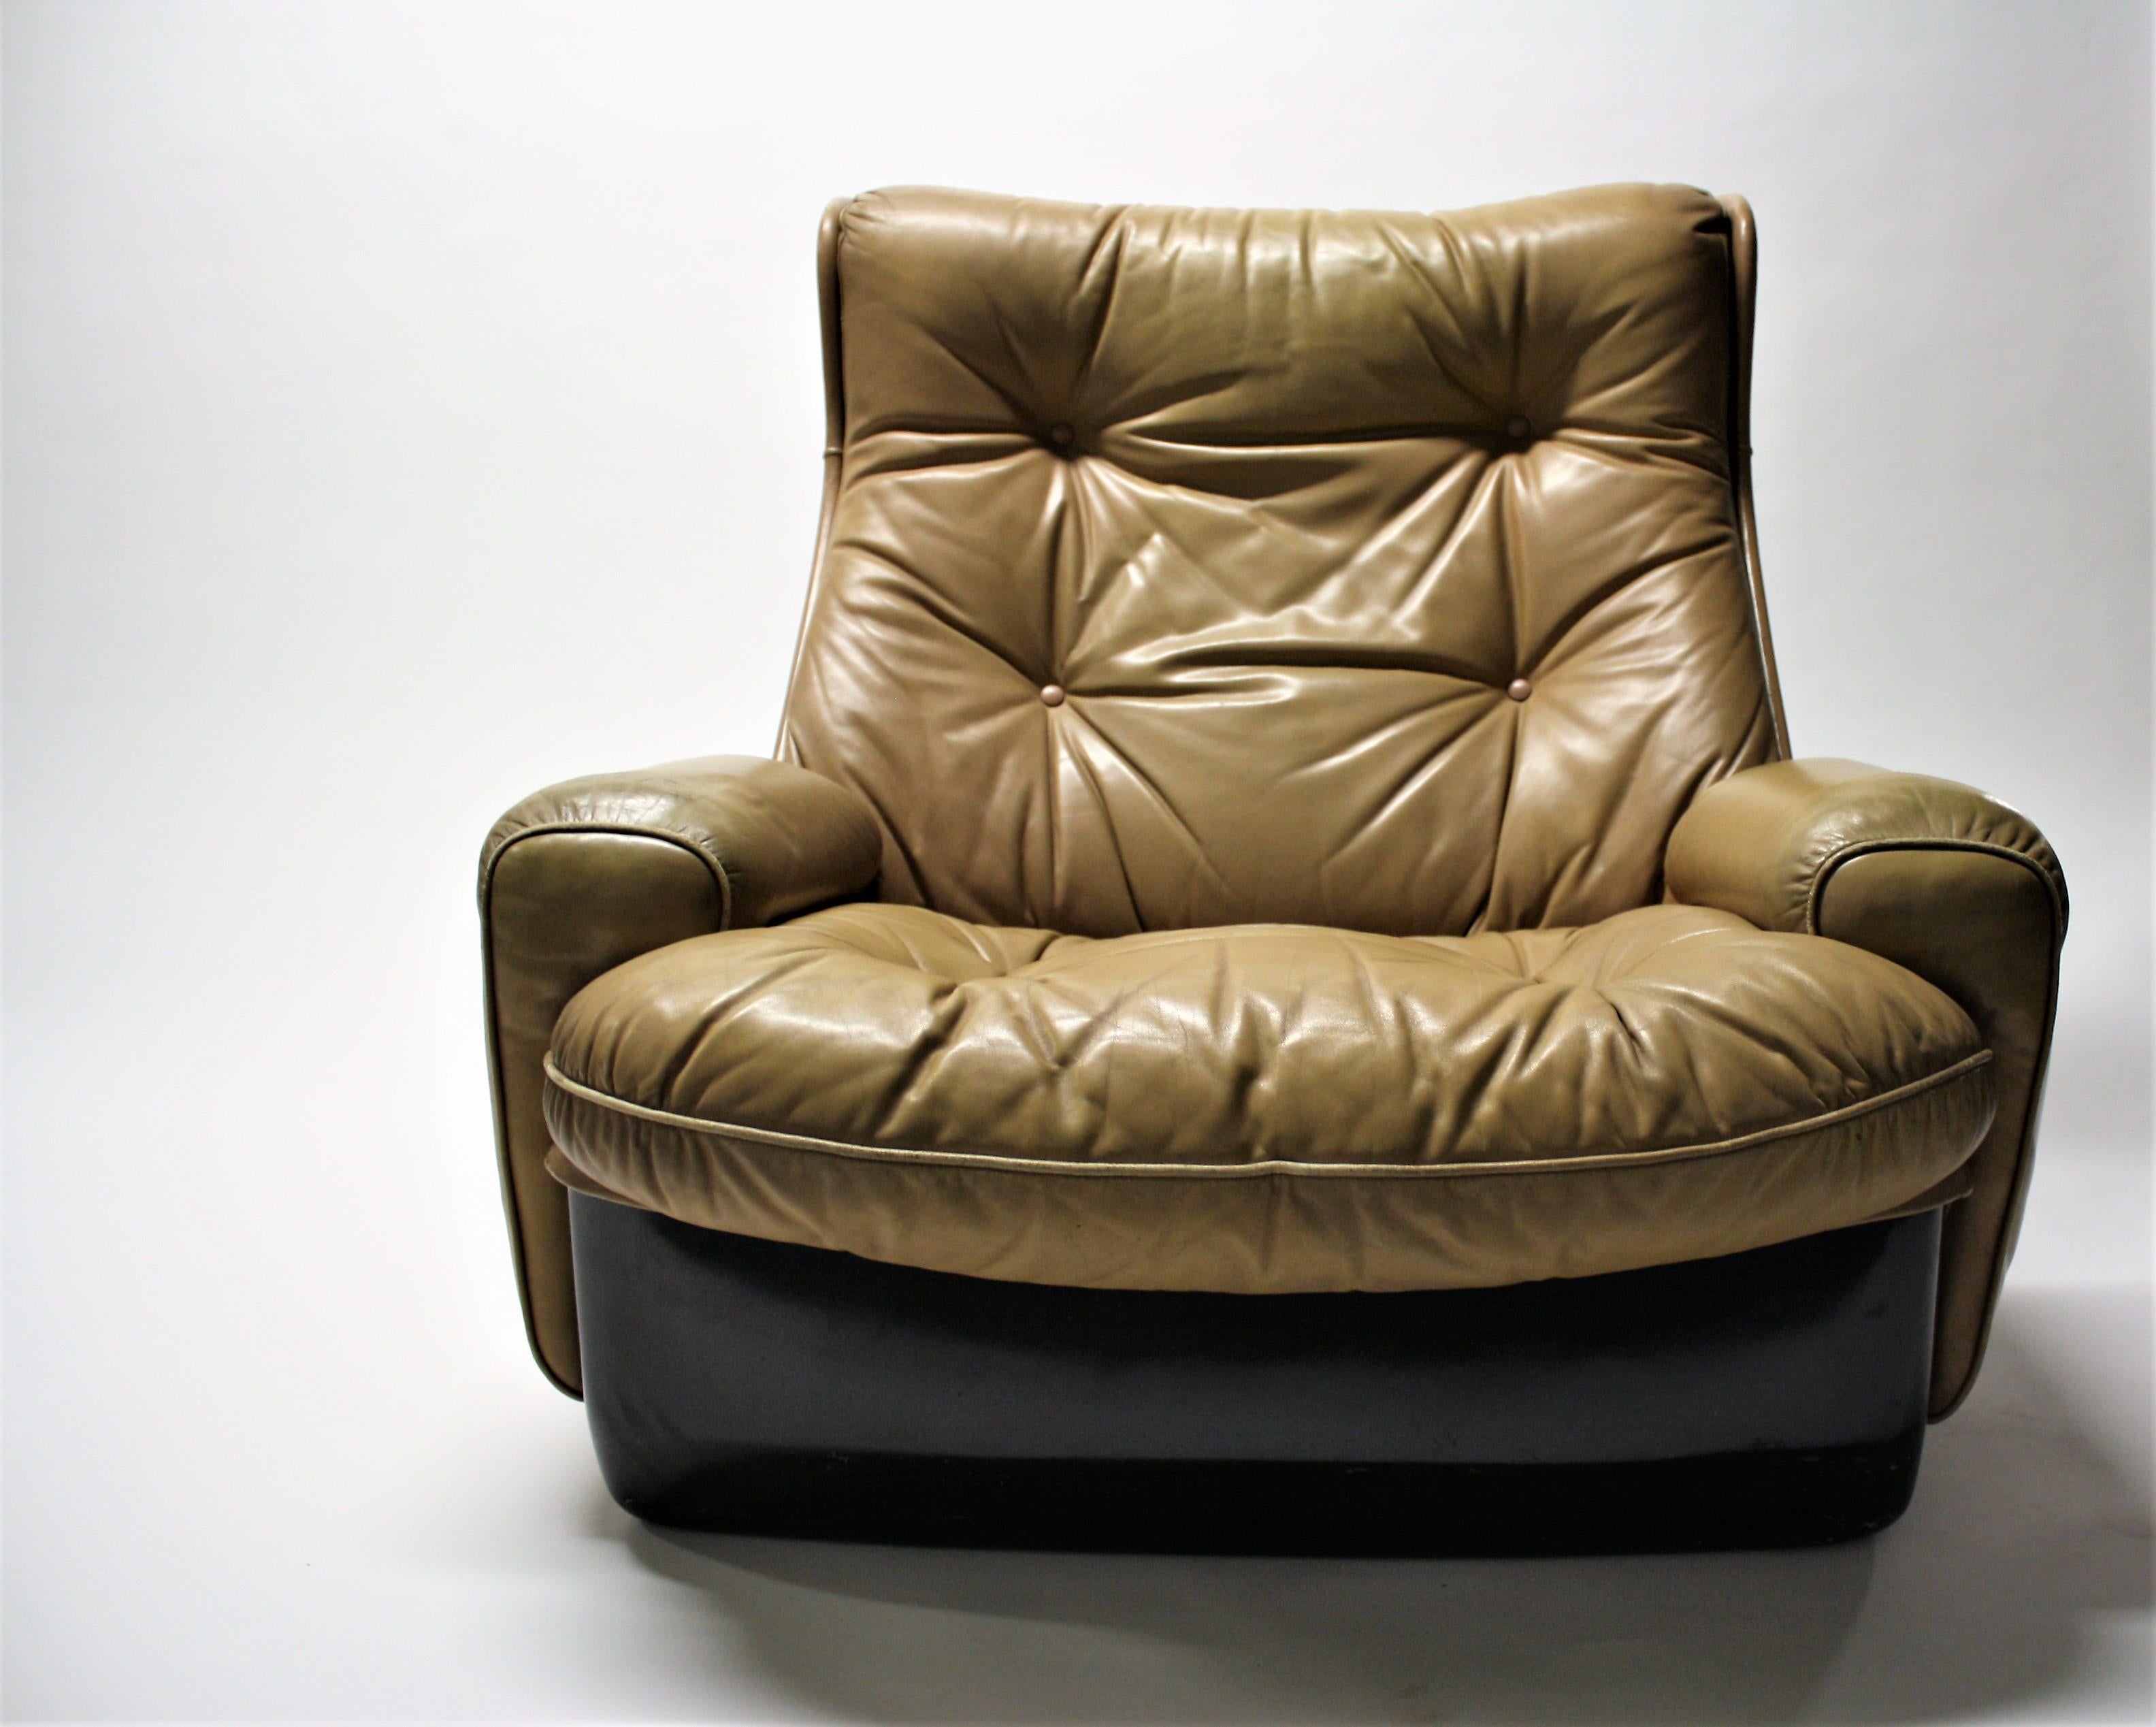 Striking space age lounge chair by Airborne international.

The chair consists of a black fiberglass shell upholstered with beige butonned leather.

It sits as comfortable as it looks, which is a good thing.

The black and brown colours give